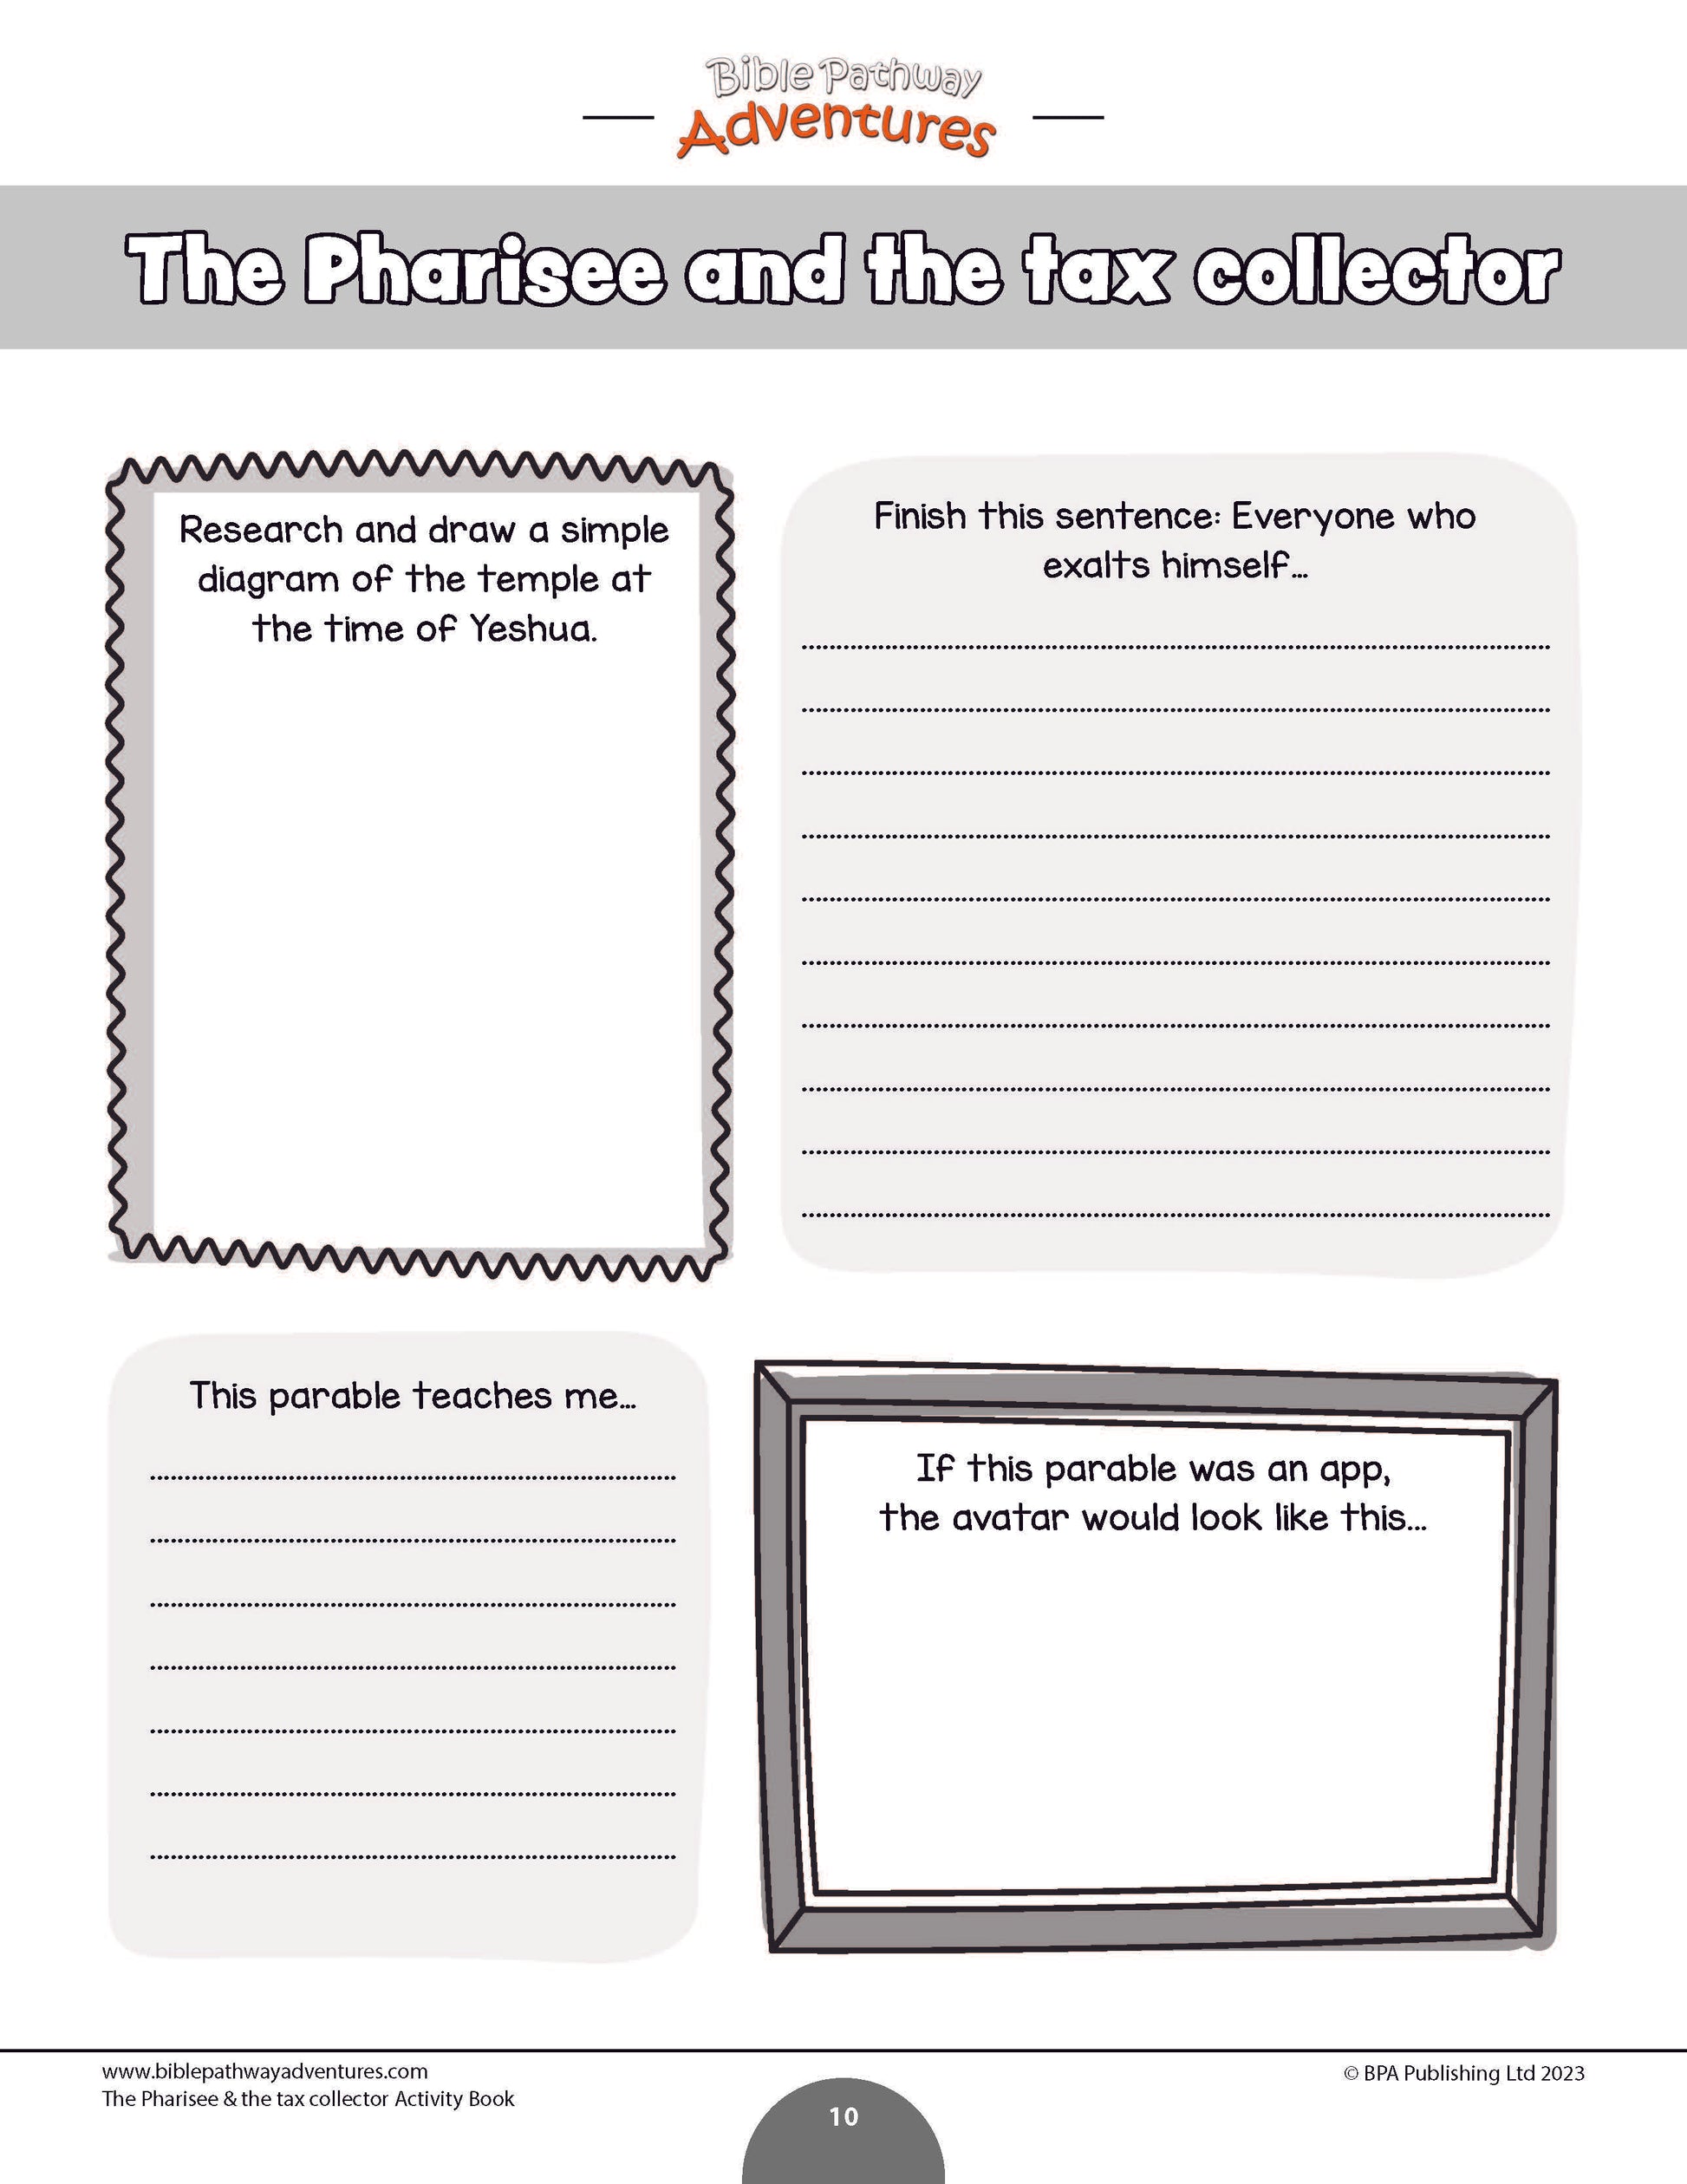 Parable of the pharisee the tax collector activity book pdf â bible pathway adventures